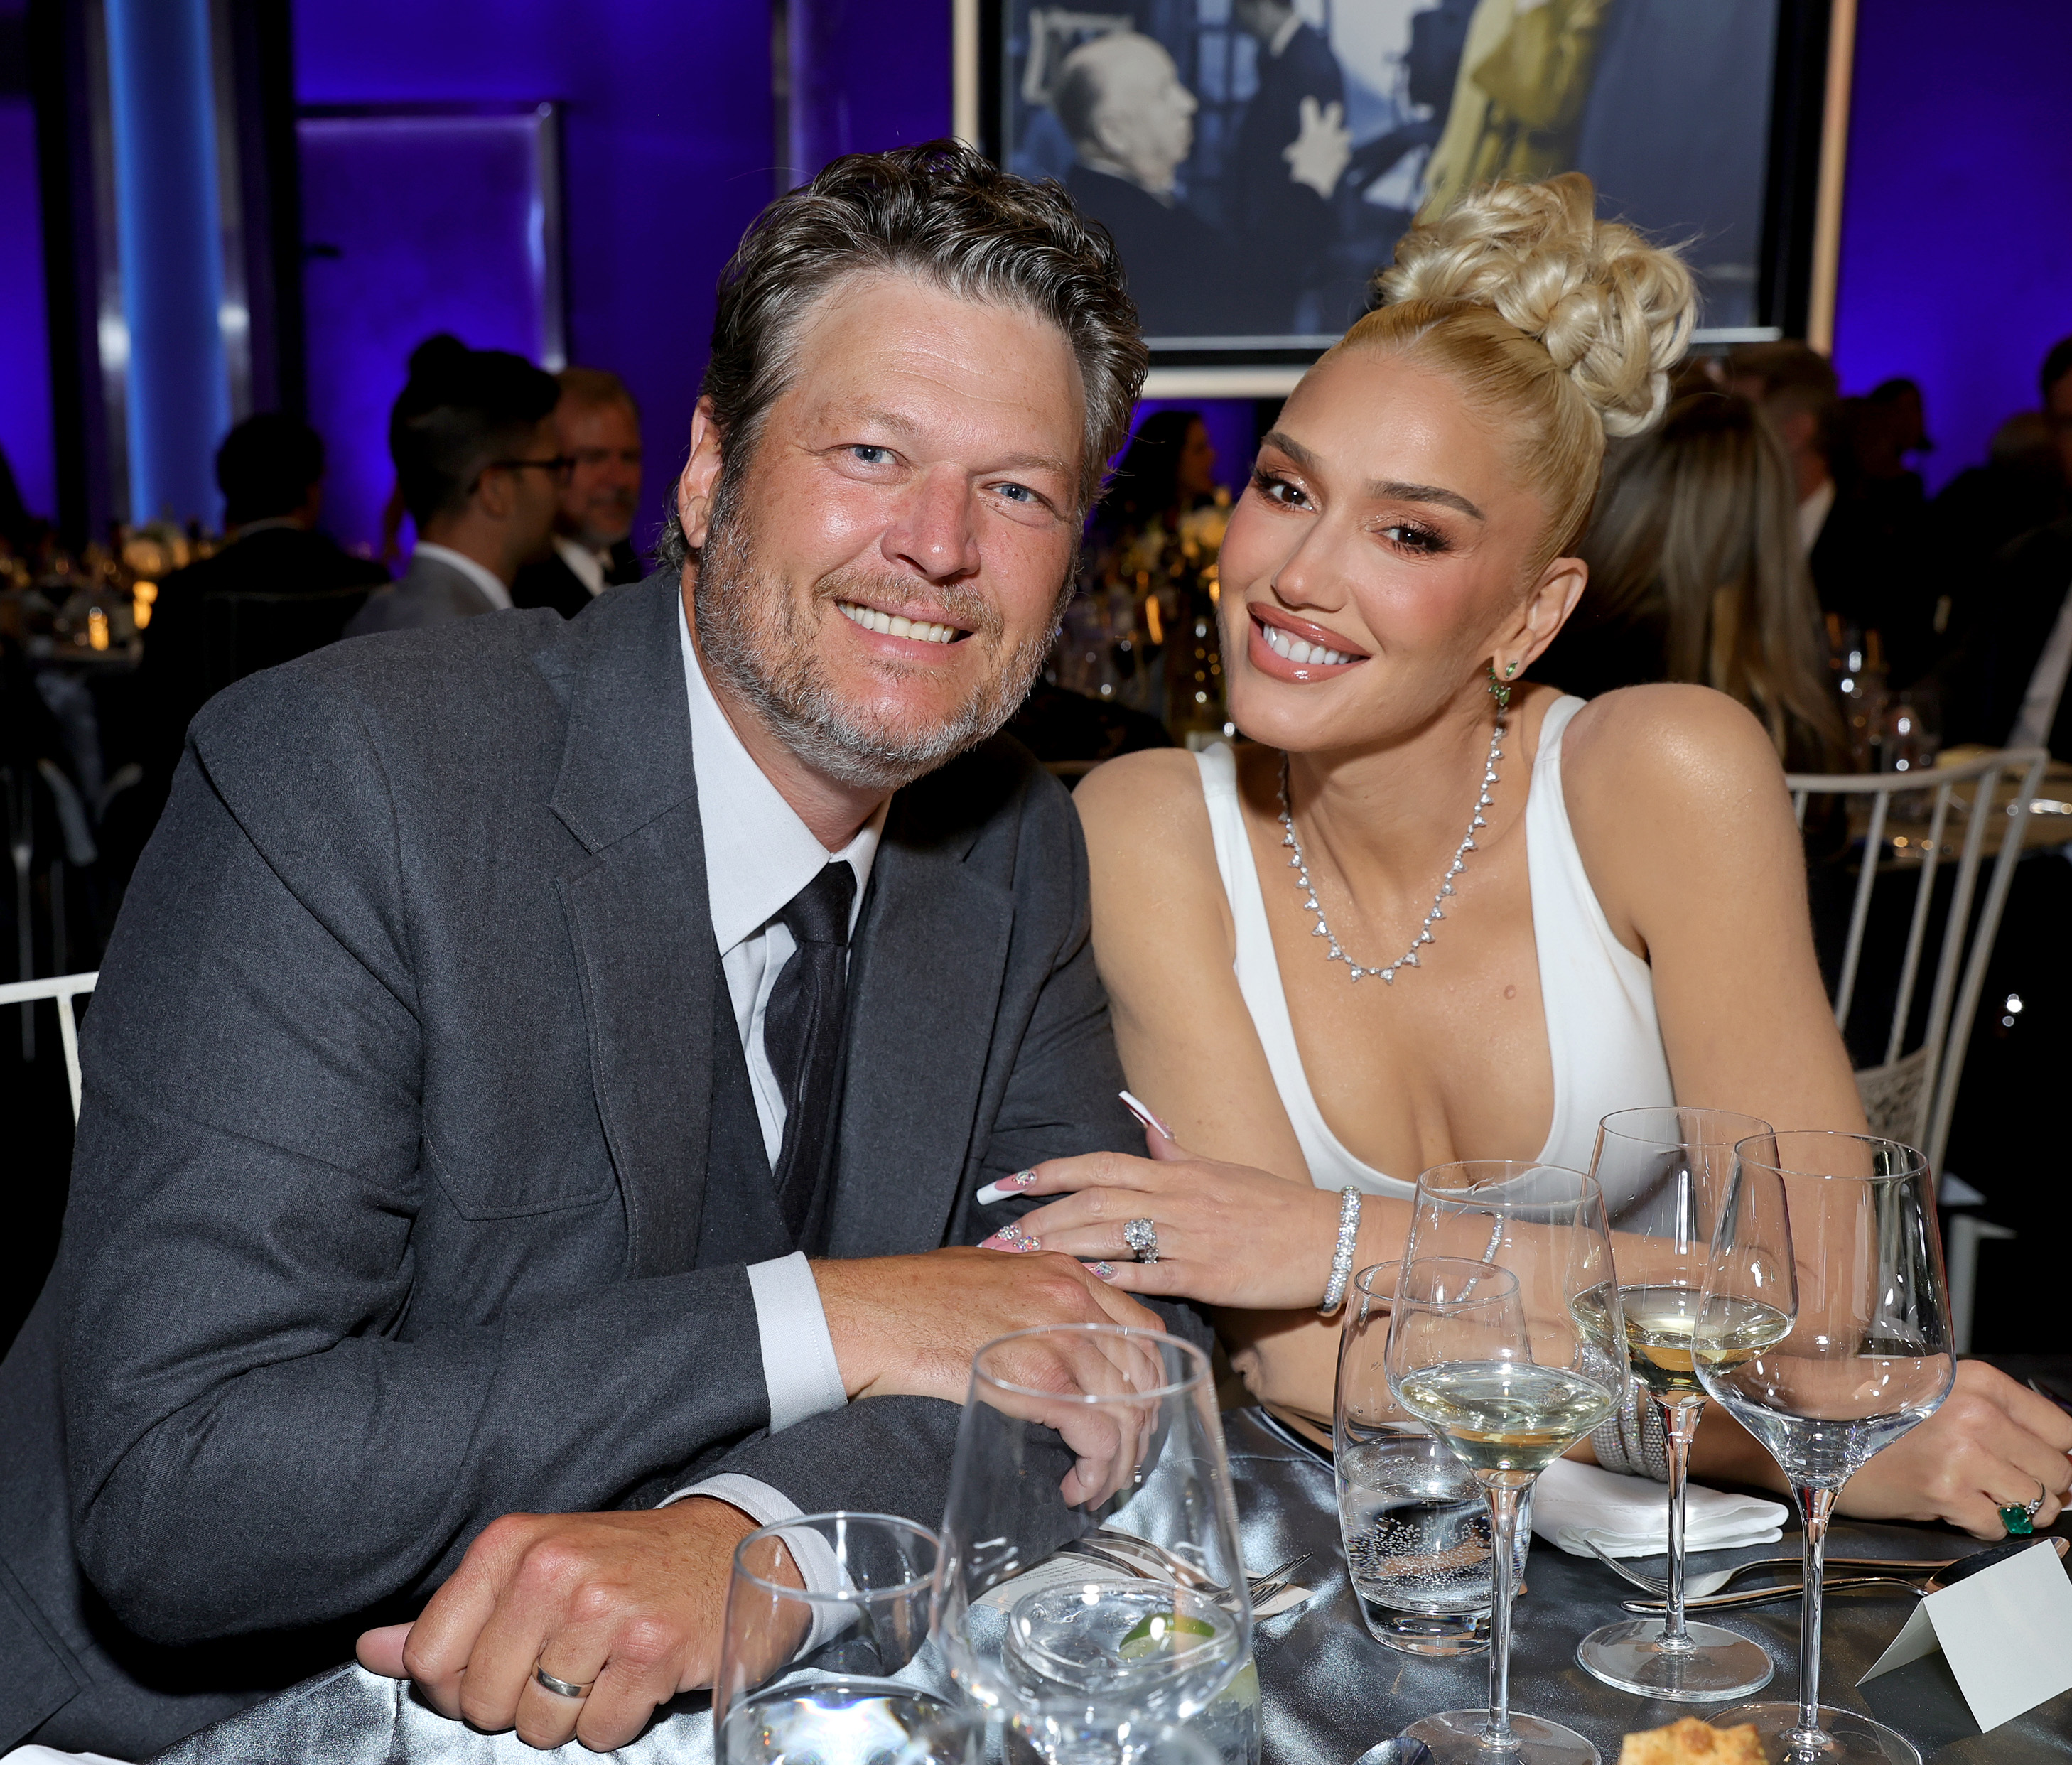 Blake's wife, Gwen Stefani, was not pictured in any of the snaps that he shared on Instagram